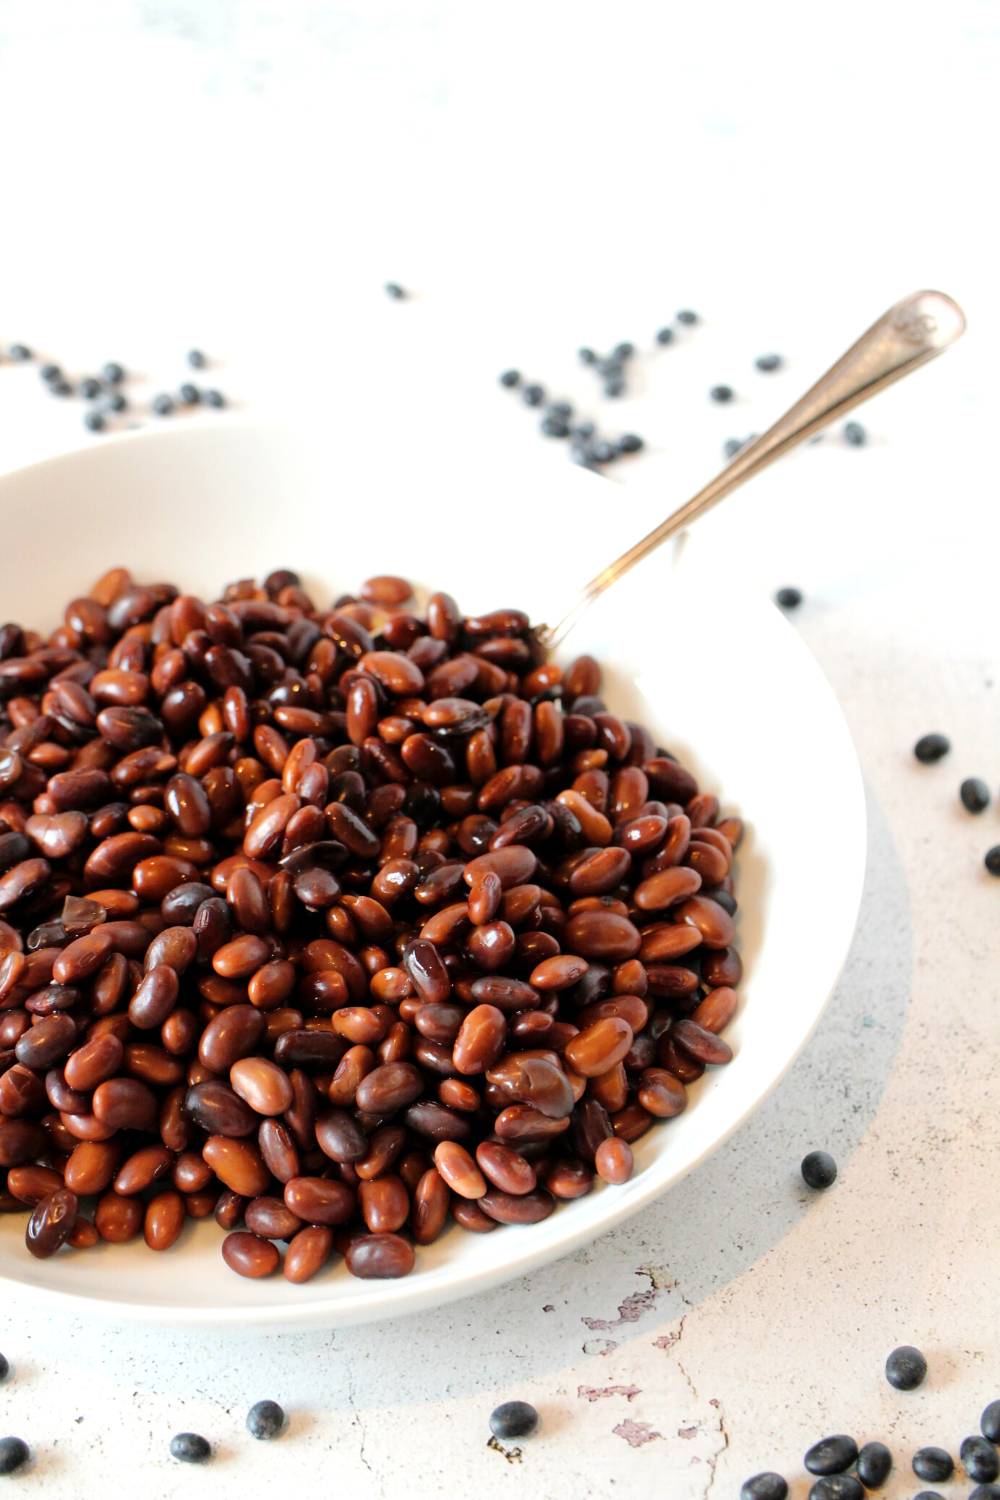 keto-friendly beans that contain only 4 grams of net carbs